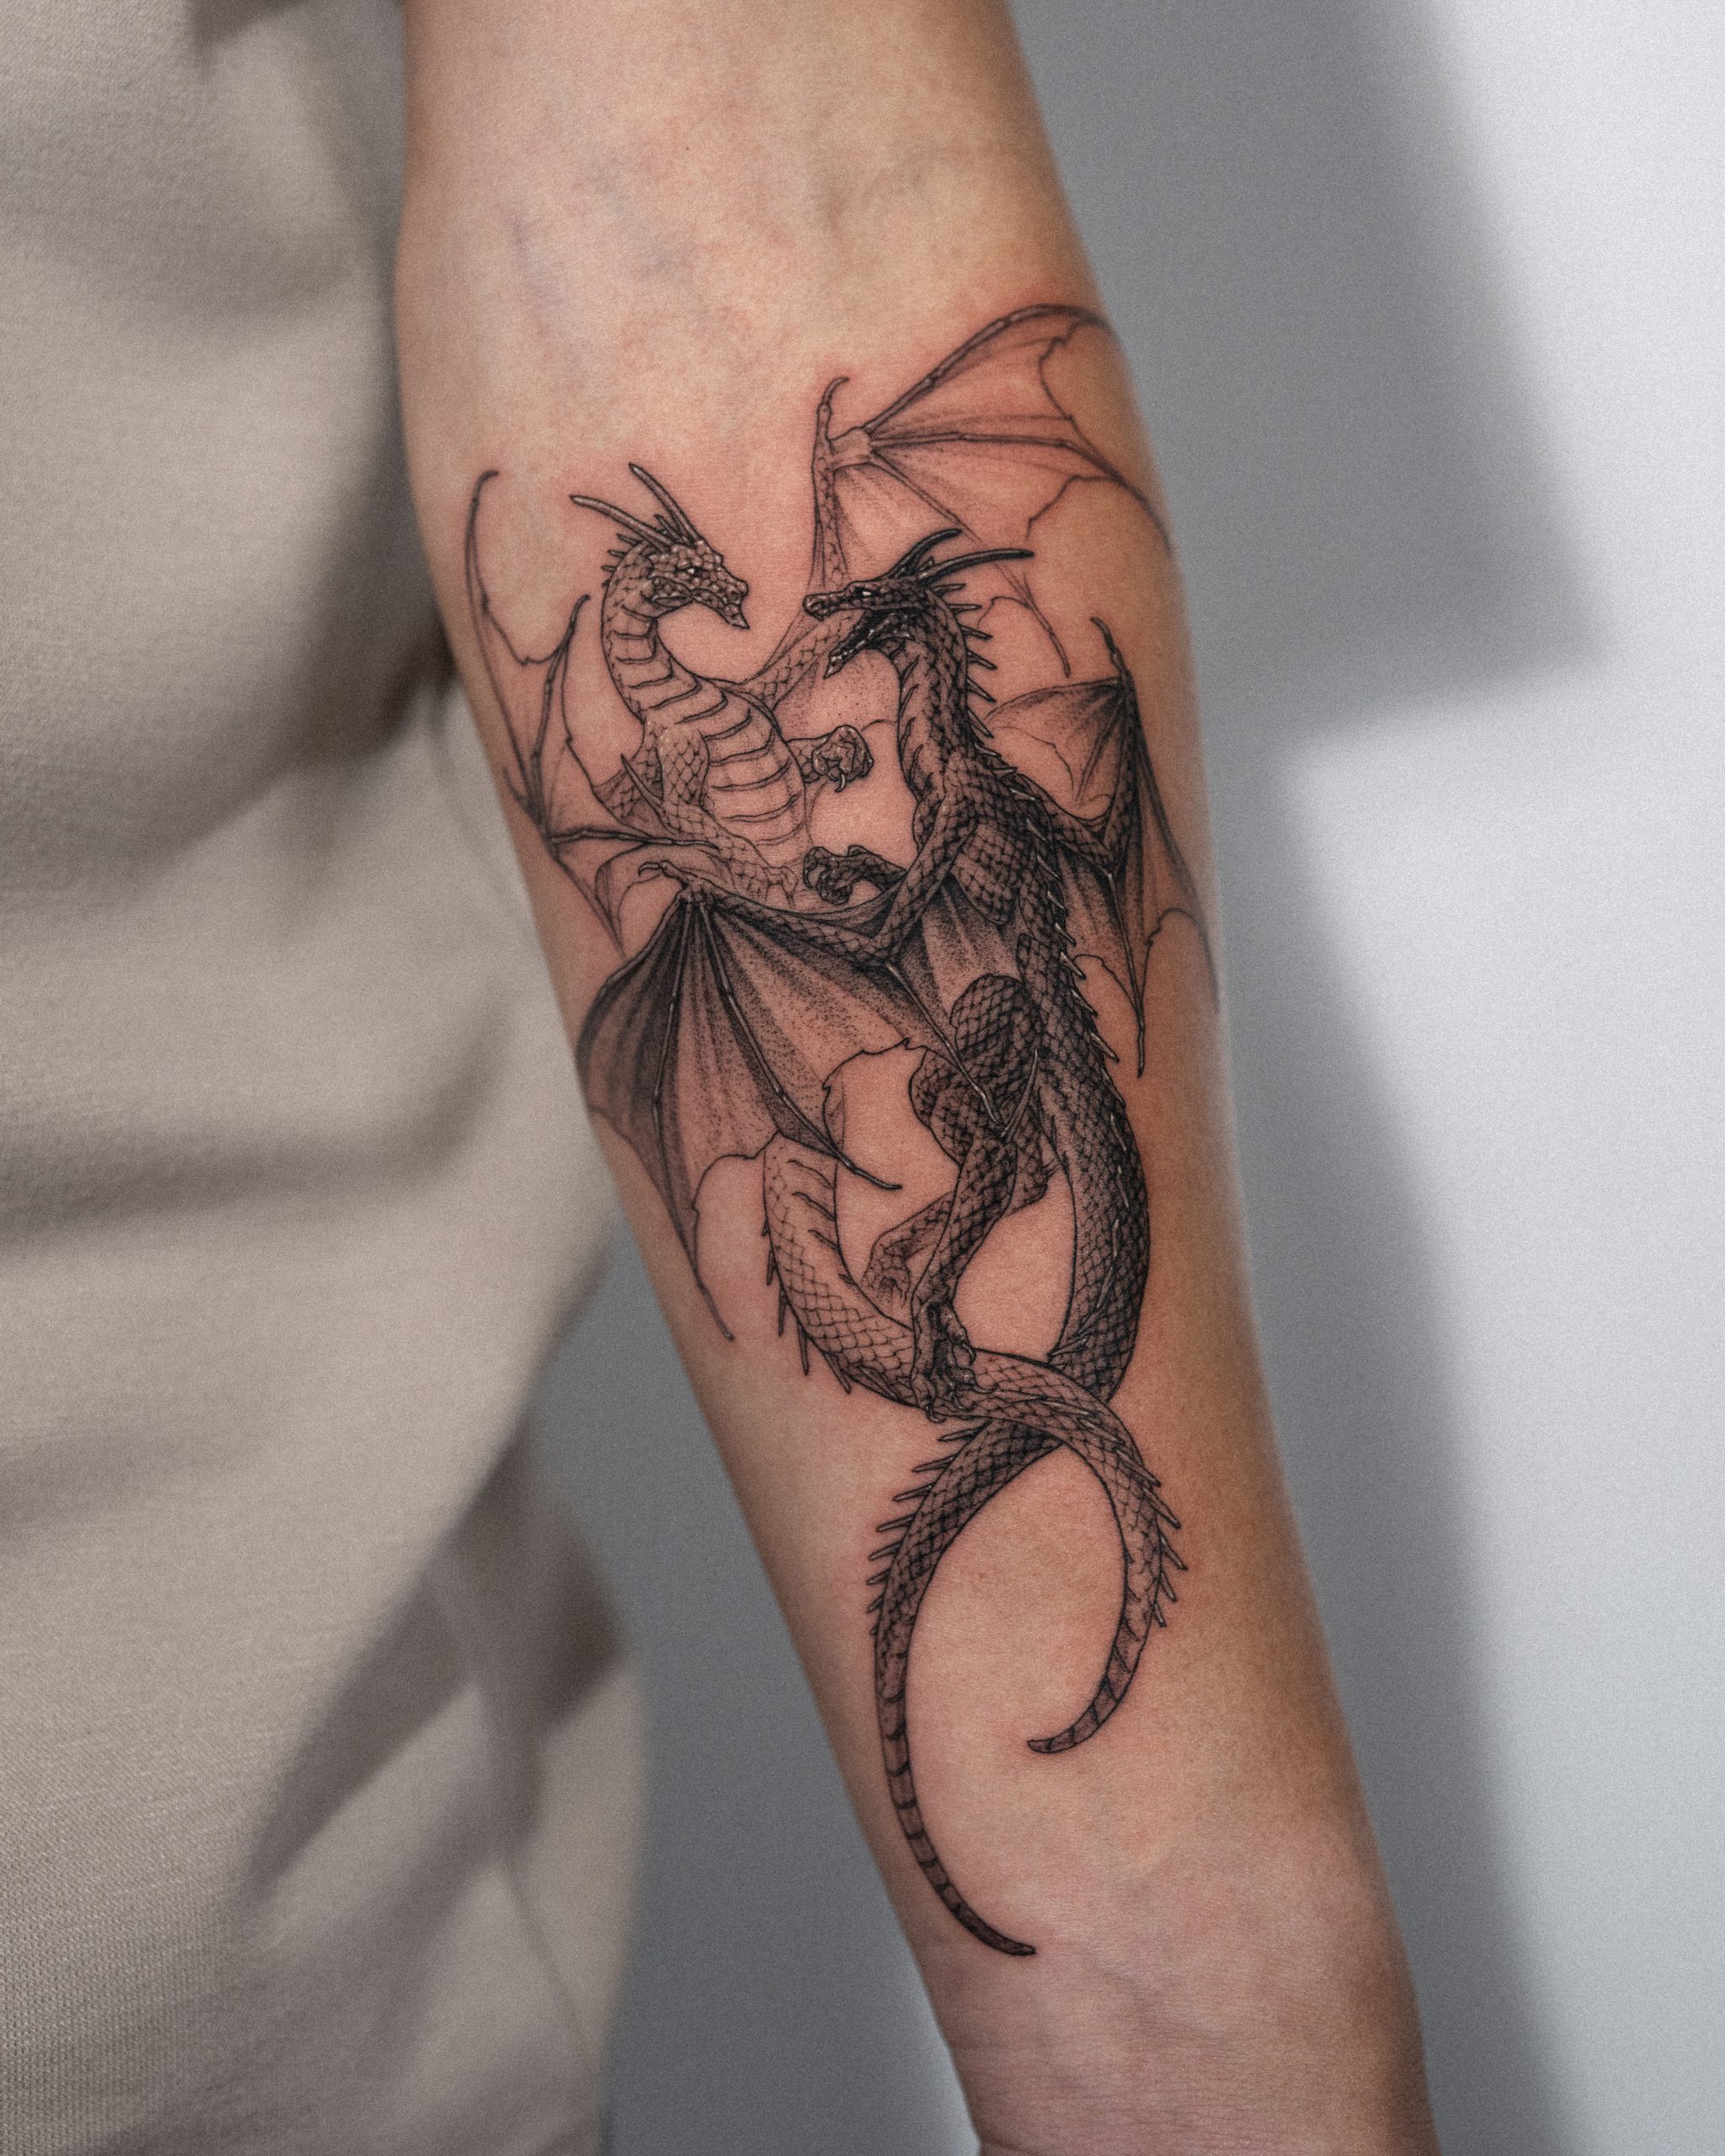 Dragon tattoos: Interview with tattoo artist Intat - Things&Ink